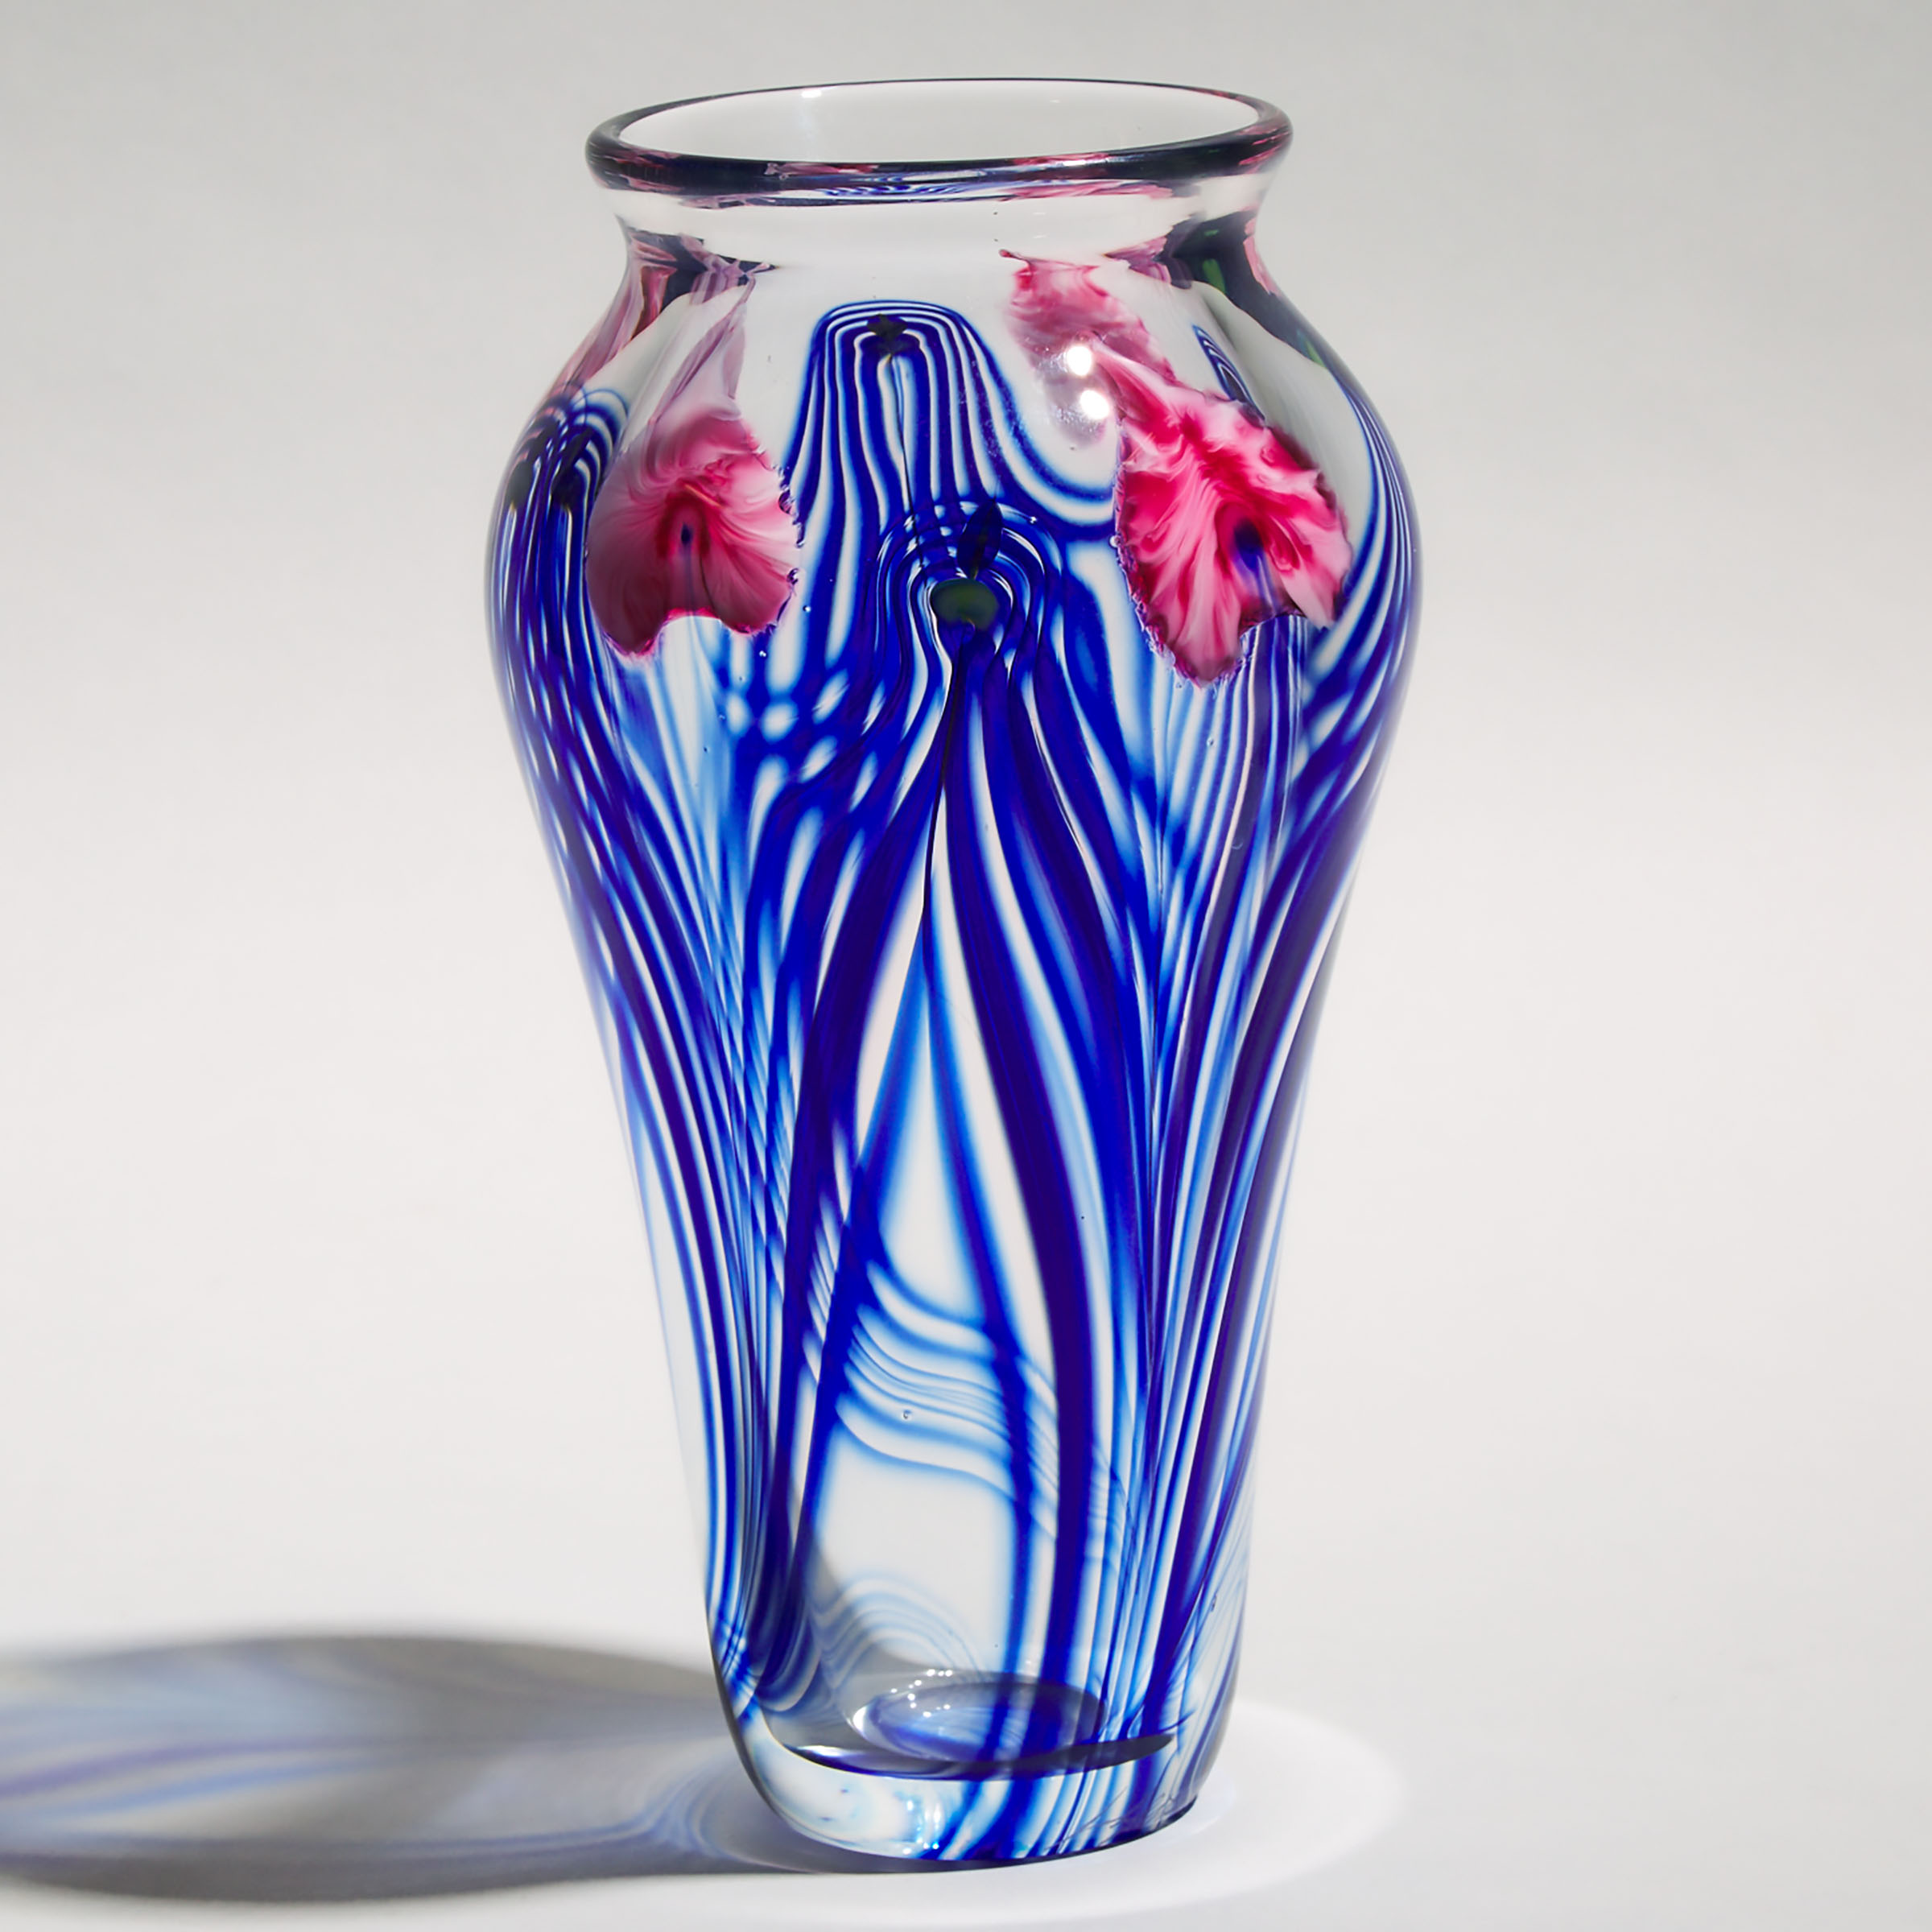 John Lotton (American, b.1964), Floral Paperweight Glass Vase, dated 1996